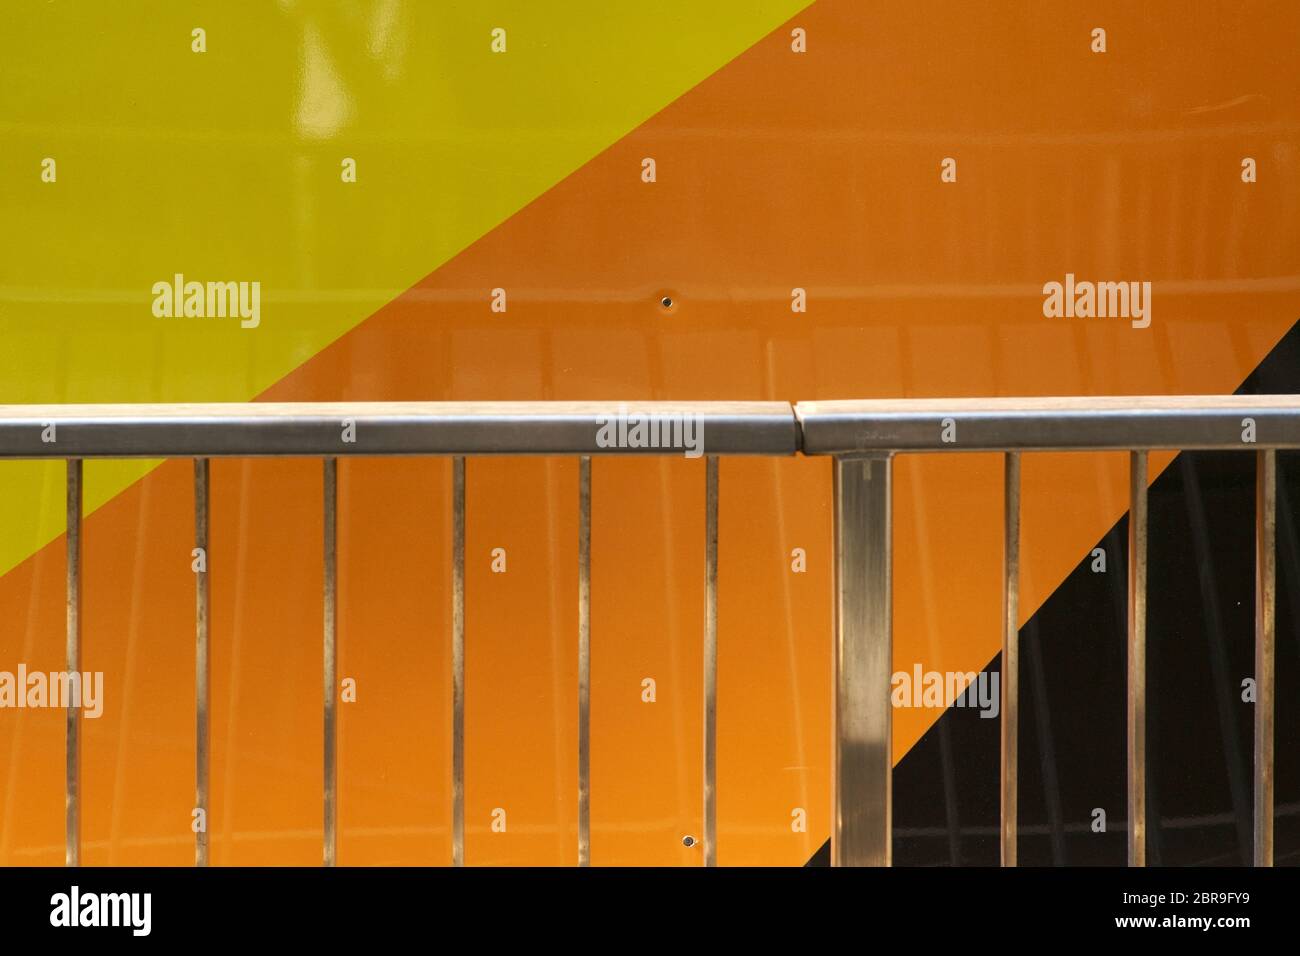 The closeup of a shiny steel handle in front of a colorful and modern metal facade. Stock Photo